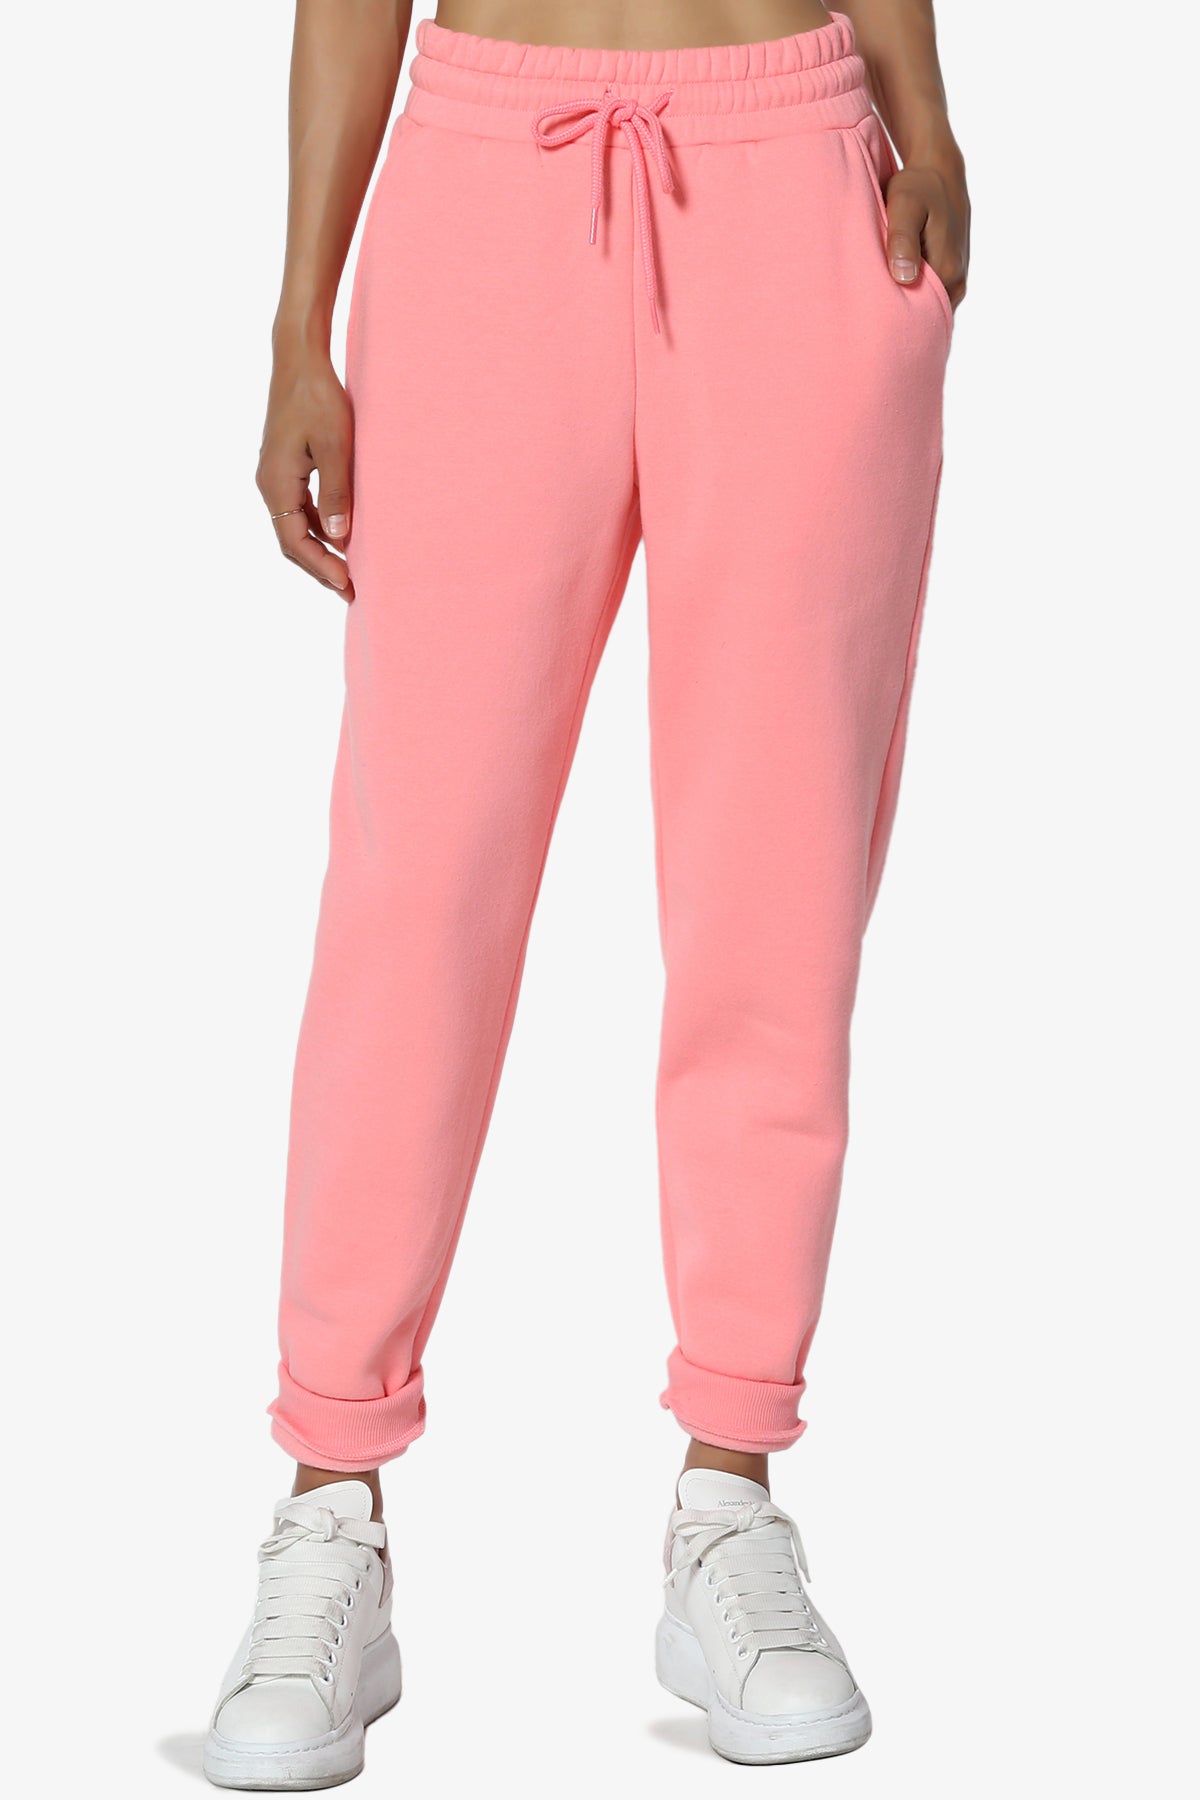 Lightweight Buttery Soft Women High Waisted Sweatpants Relaxed-fit Lounge  Joggers Front Pockets Track Pants (Color : B Size : Lcode) (A S Code)